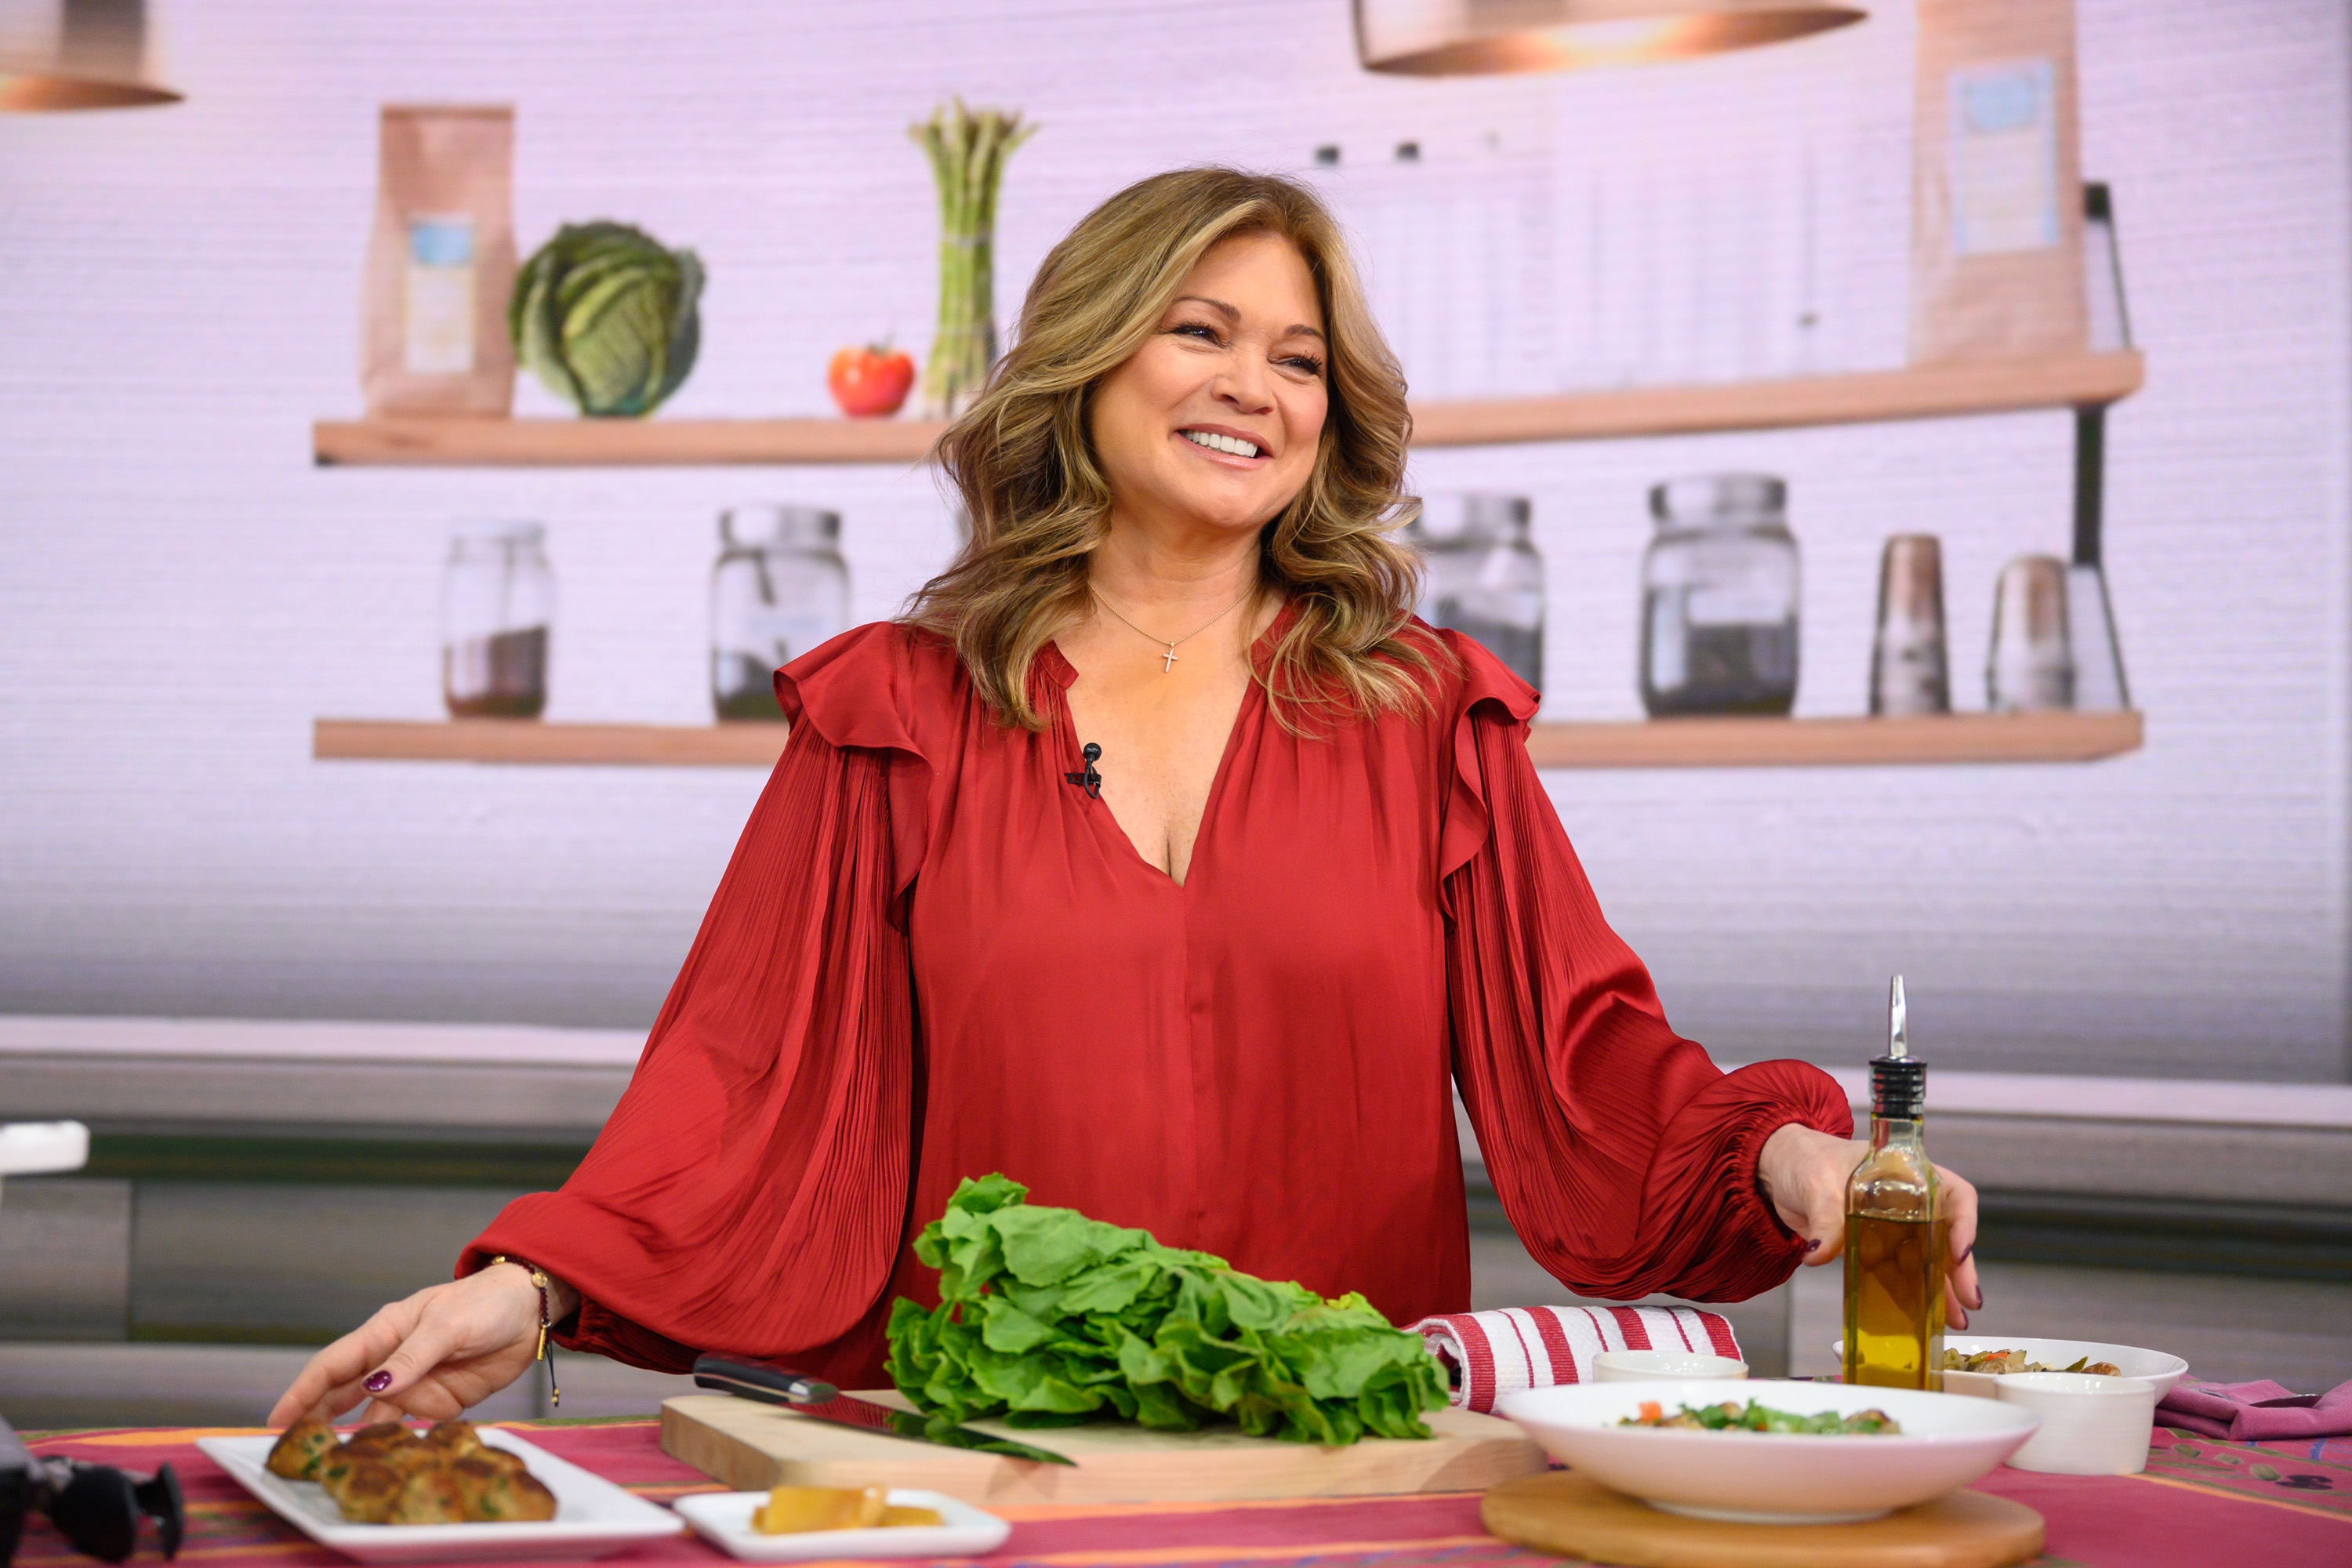 Valerie Bertinelli on "Today" on January 7, 2020. | Source: Getty Images